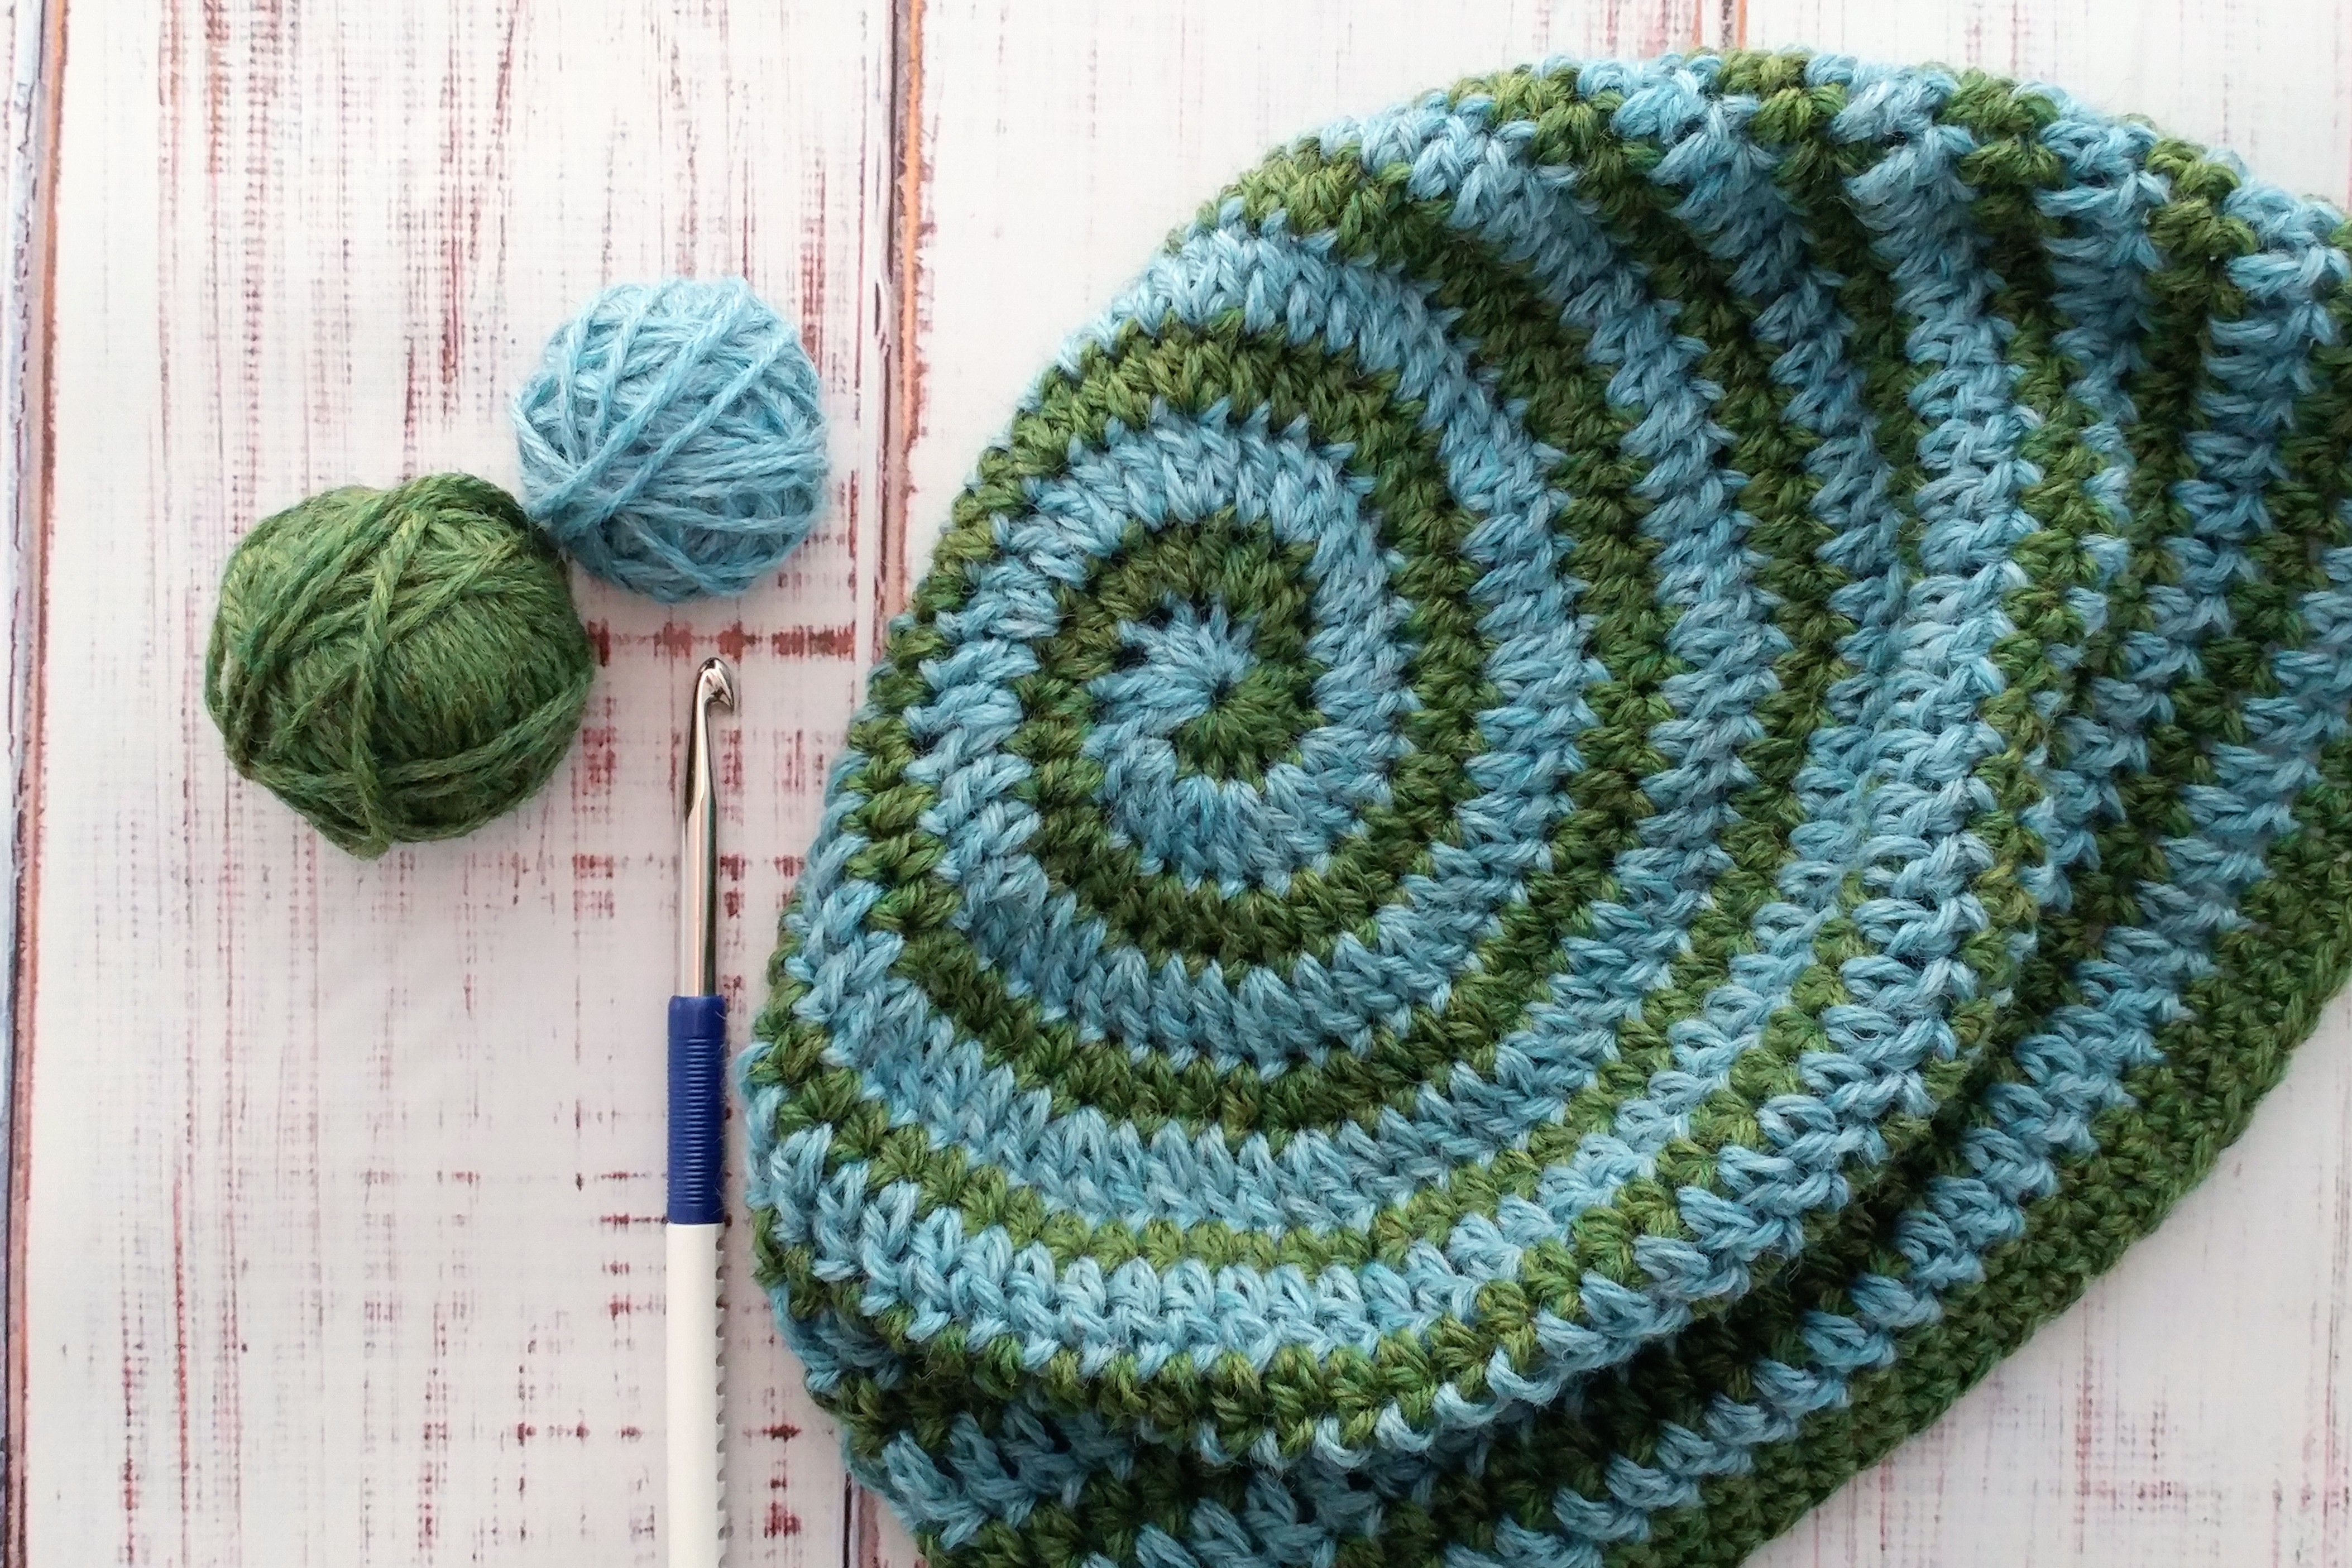 Crochet hat with 2-color spiral